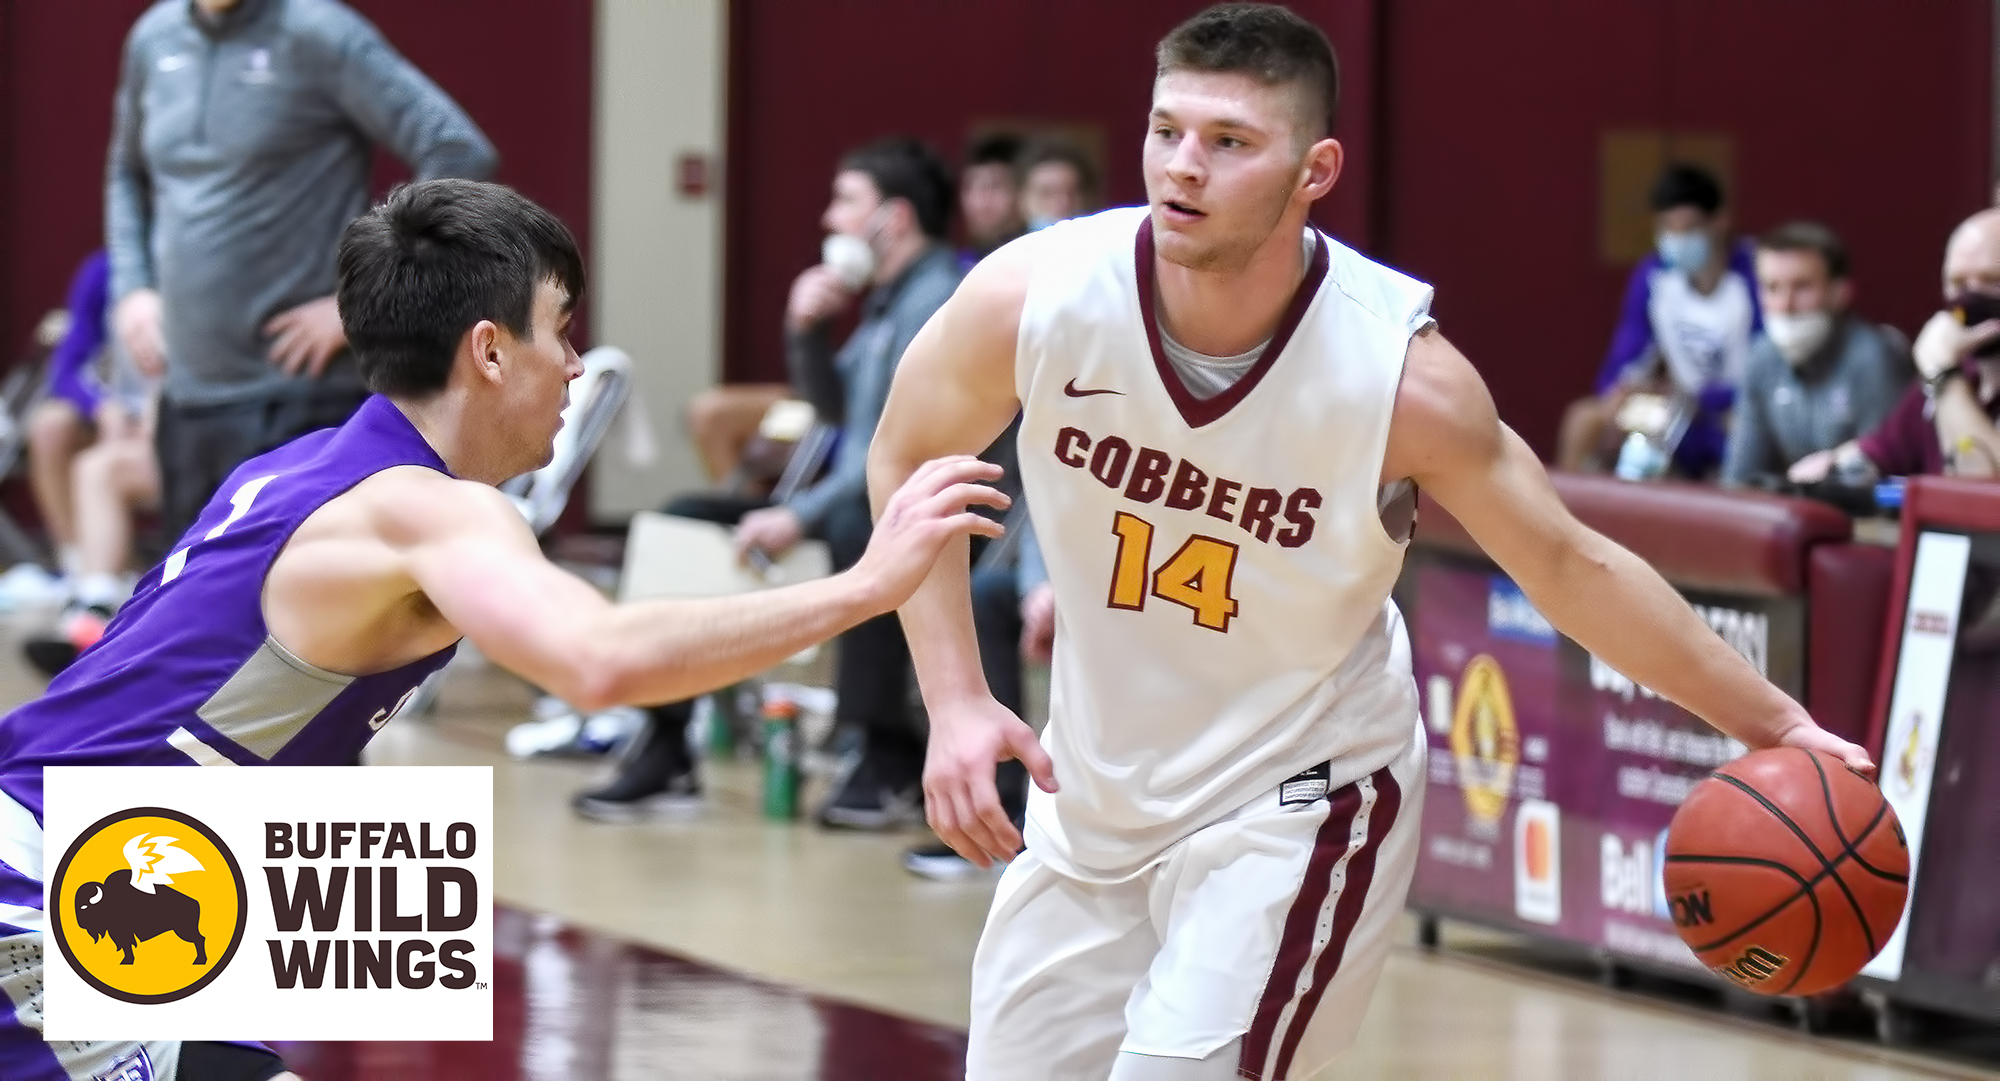 Freshman Talon Hoffer led the Cobbers in points and rebounds at Hamline. He put up a season-high 12 points and grabbed six rebounds.